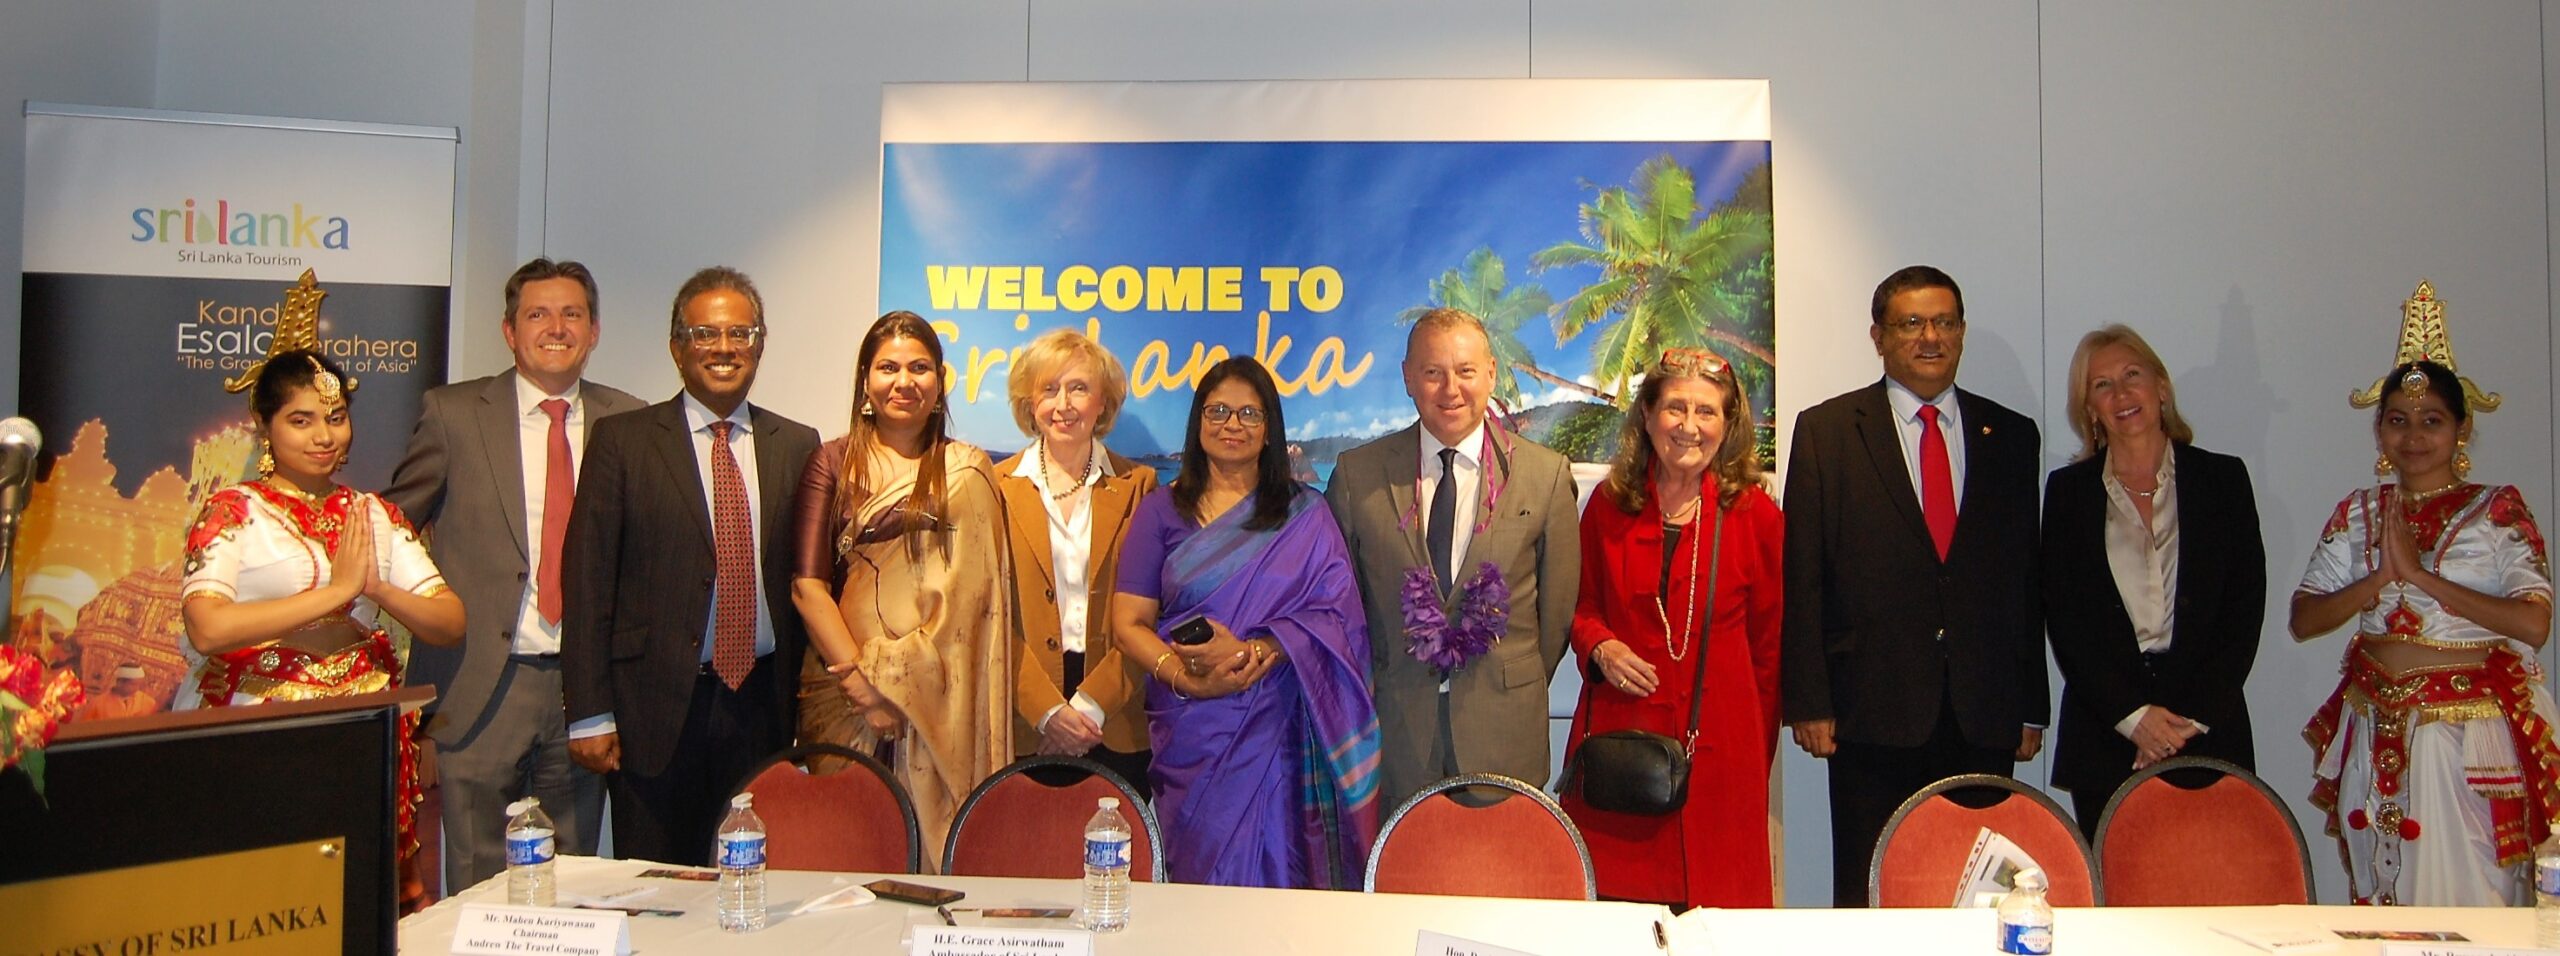 The Governor of the Province of Namur in Belgium Inaugurates Sri Lanka Tourism Promotion Workshop